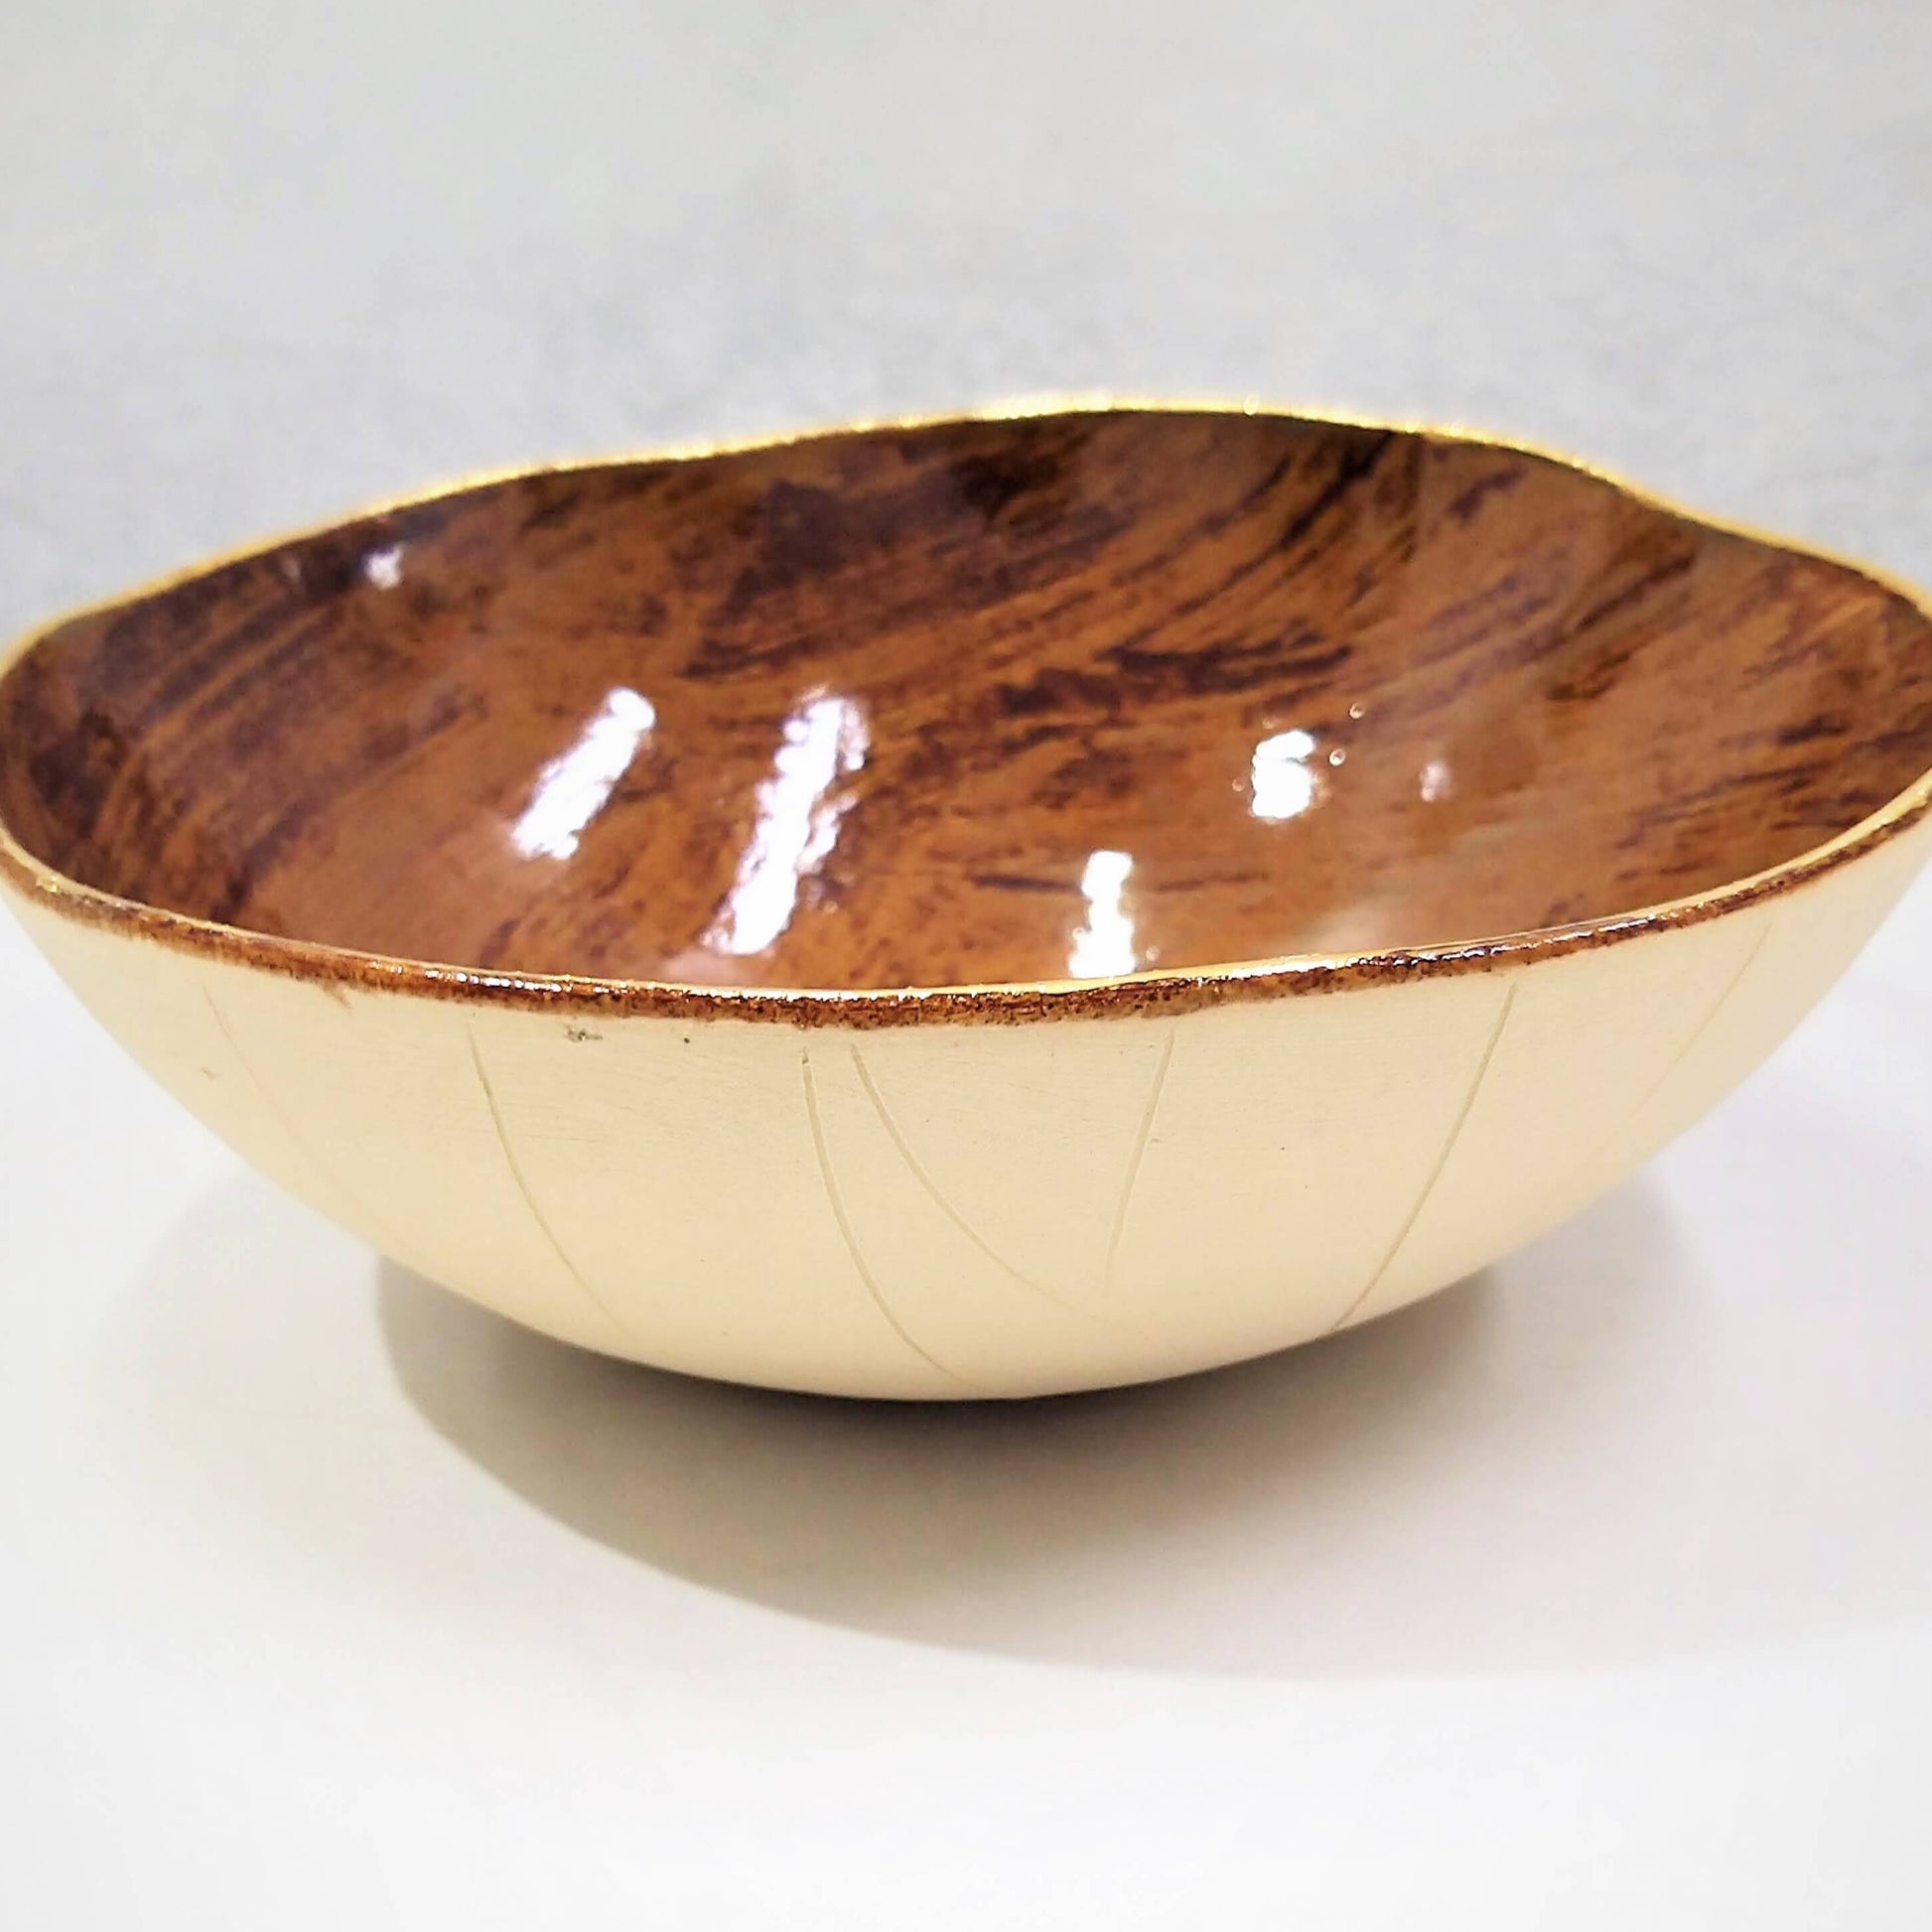 Brown and Cream with 24k Gold Ceramic Bowl